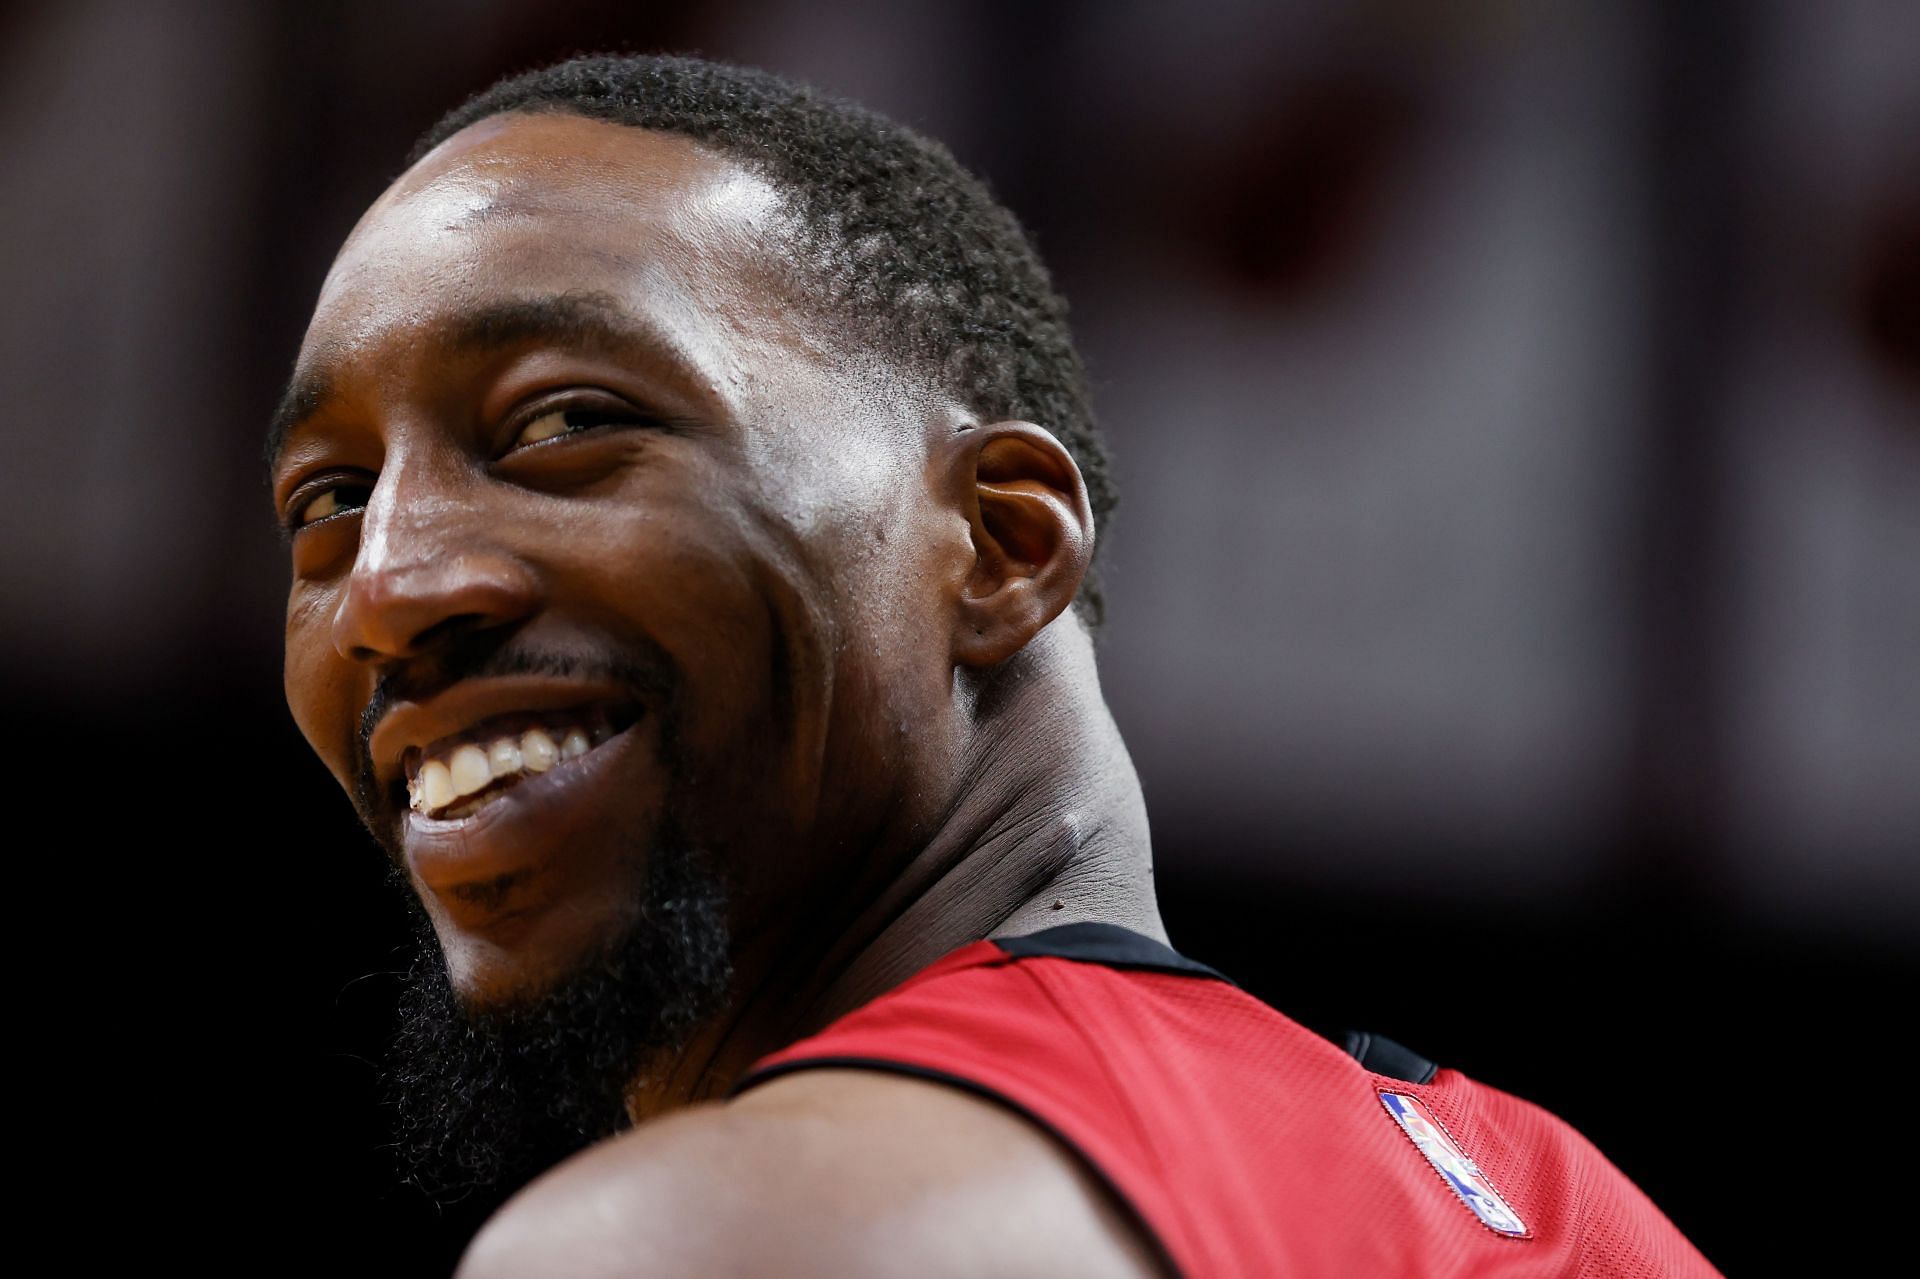 Miami Heat center Bam Adebayo is heating up in the Defensive Player of the Year conversation